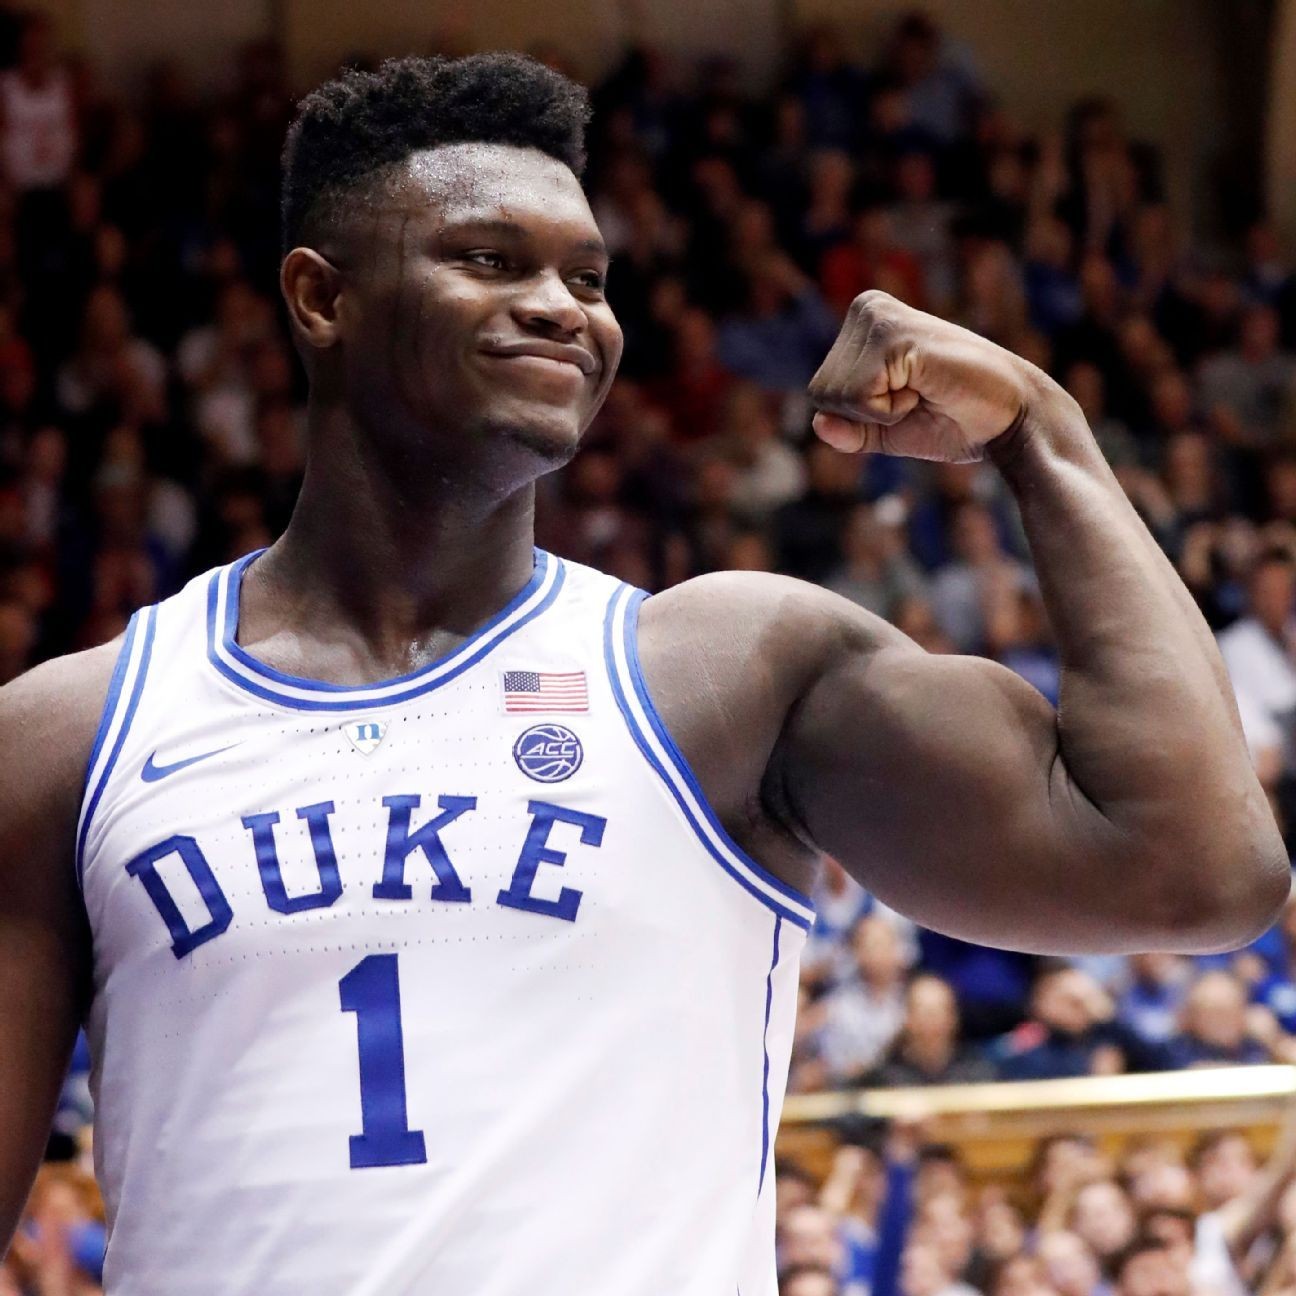 UNCDuke tickets approaching Super Bowl prices because of Zion Williamson